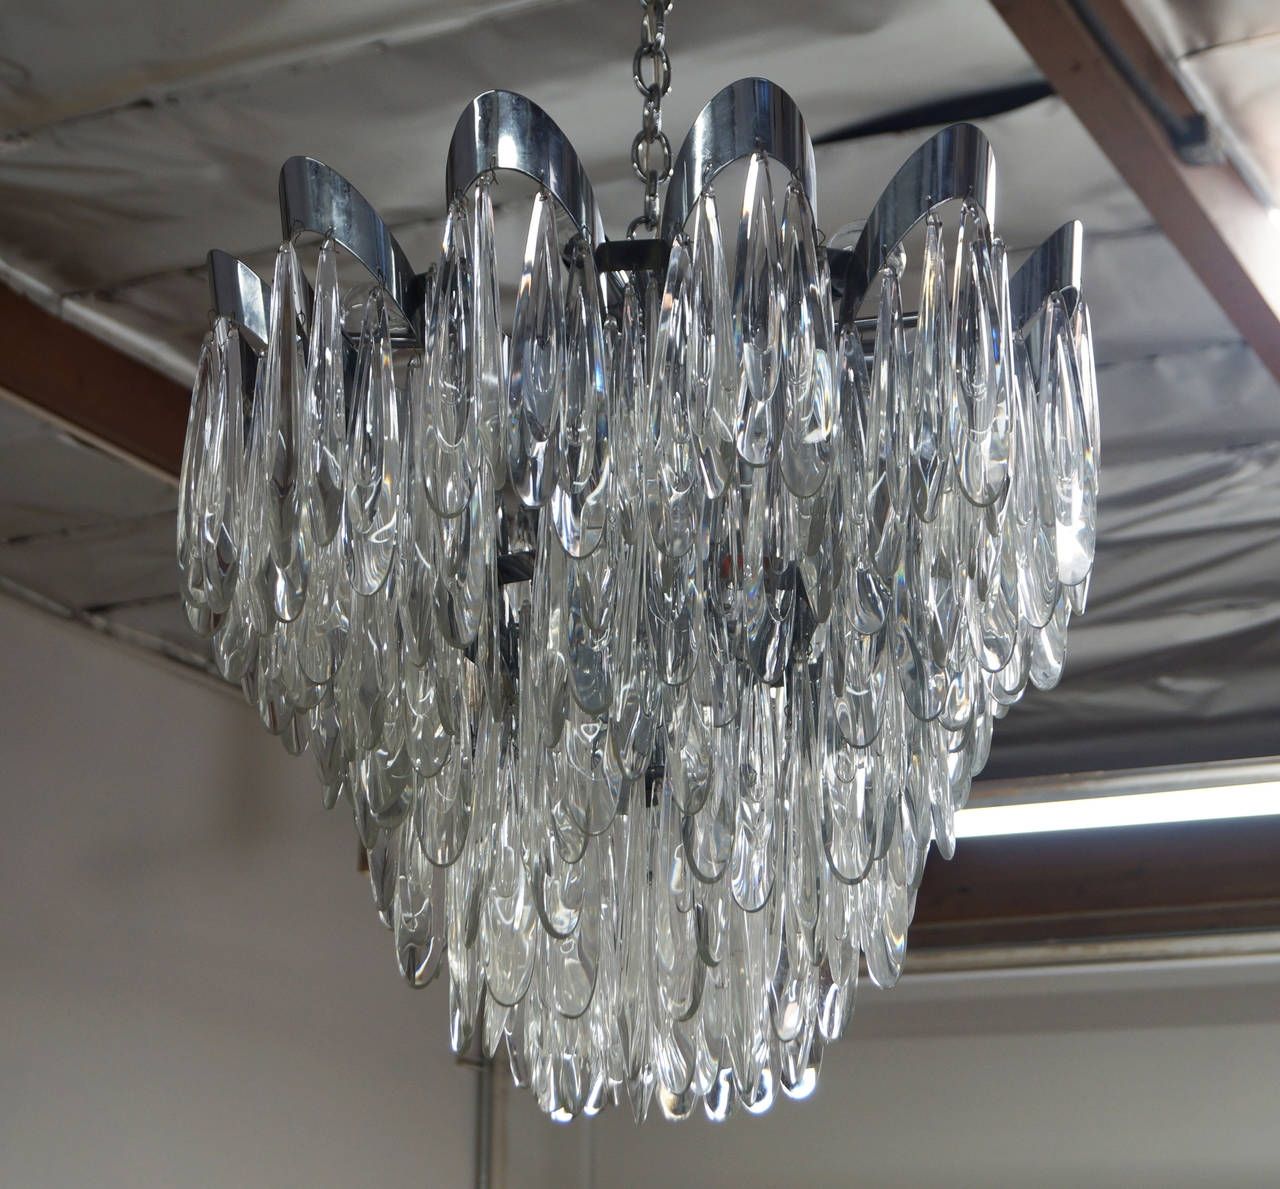 Glamorous Ultra Modern Chandelier 40 For Home Design Modern With Regarding Ultra Modern Chandelier (View 5 of 12)